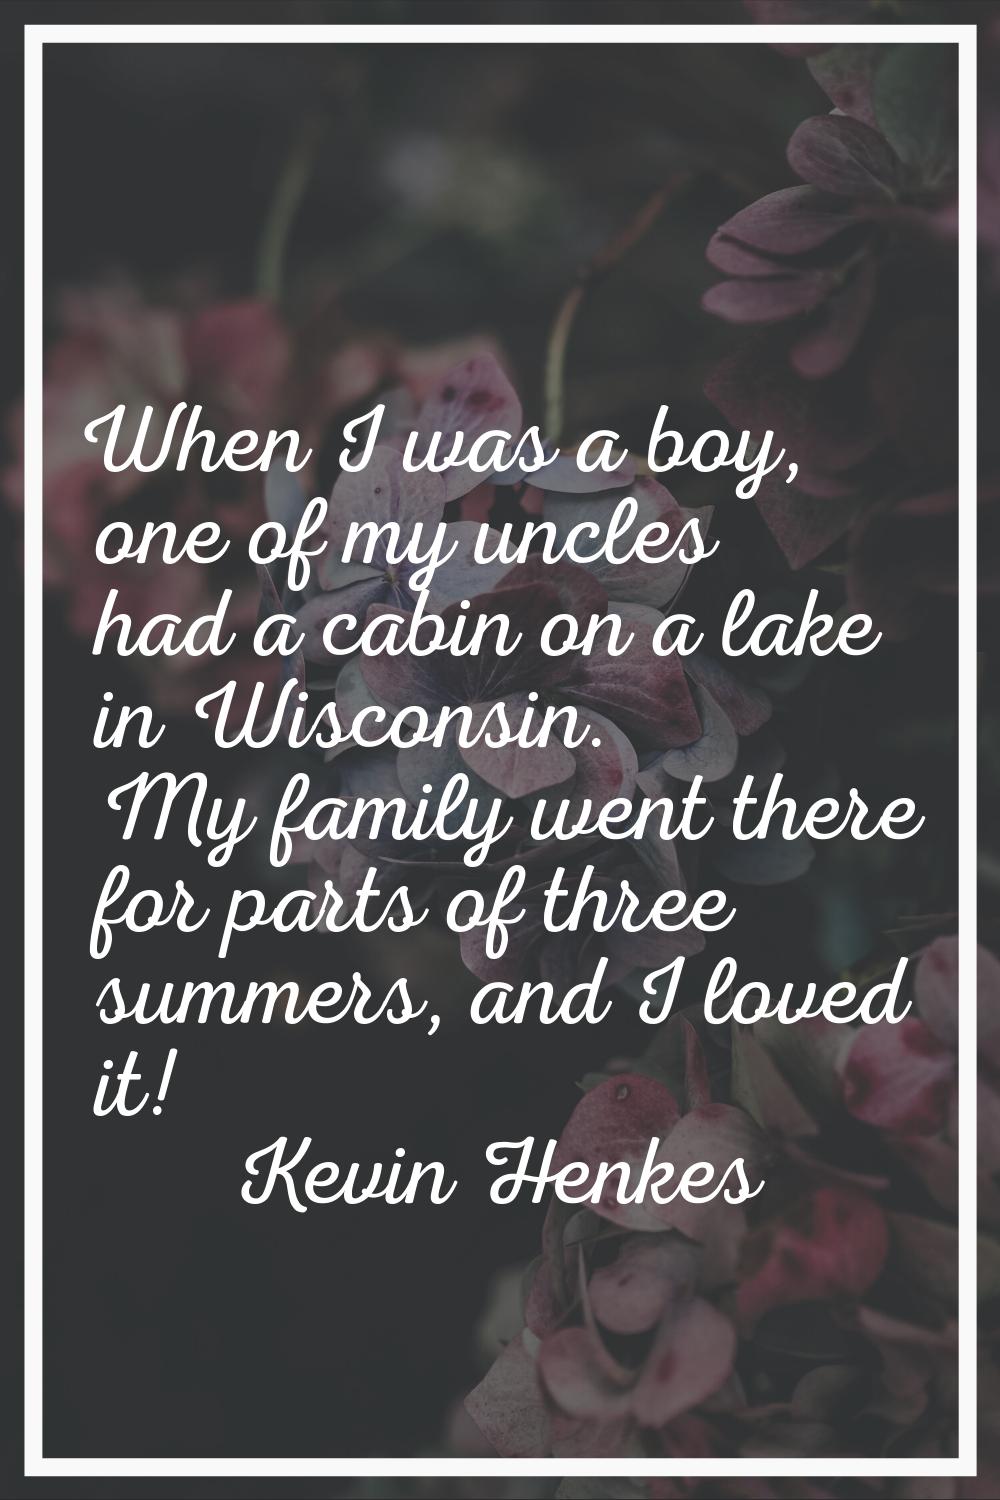 When I was a boy, one of my uncles had a cabin on a lake in Wisconsin. My family went there for par